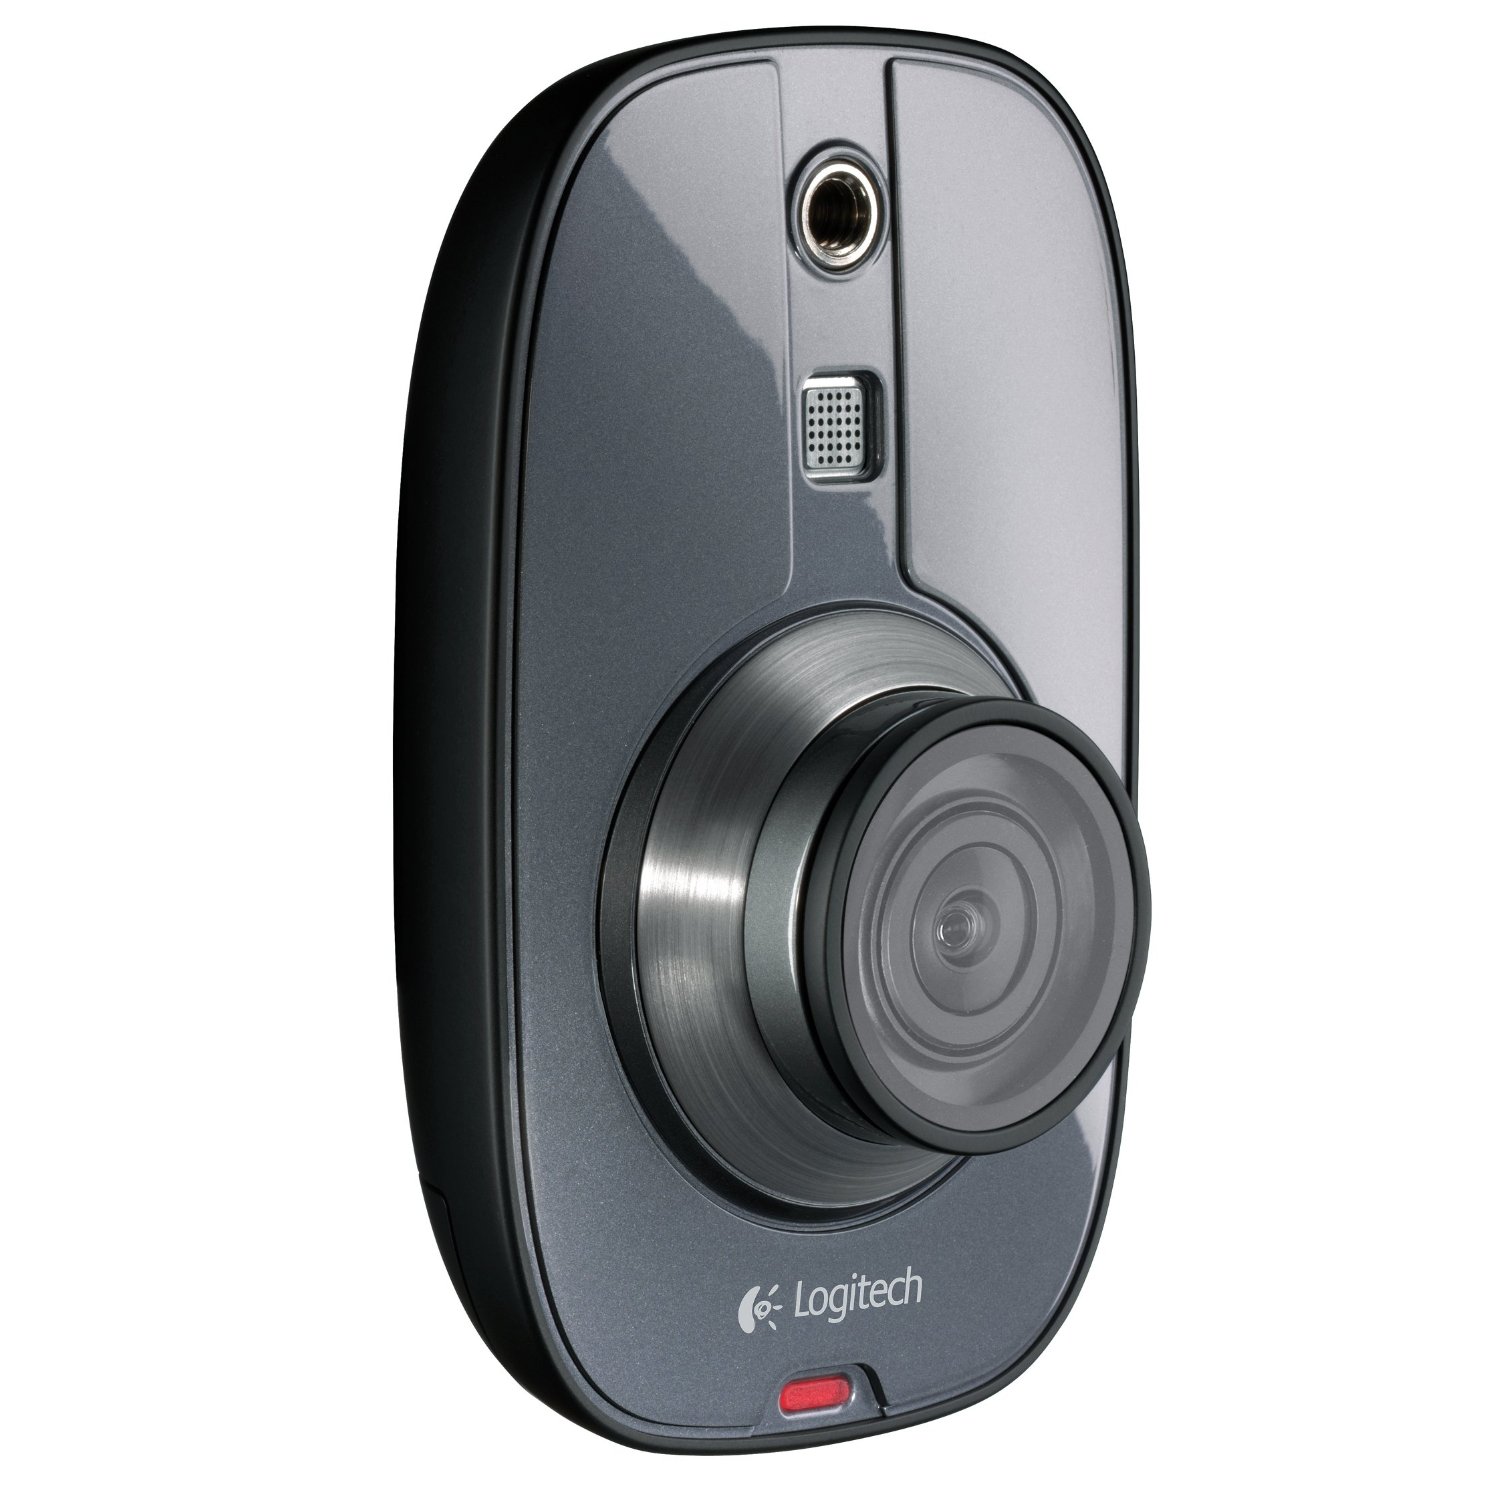 http://thetechjournal.com/wp-content/uploads/images/1110/1319469063-logitech-alert-750i-indoor-master--hdquality-security-system-6.jpg